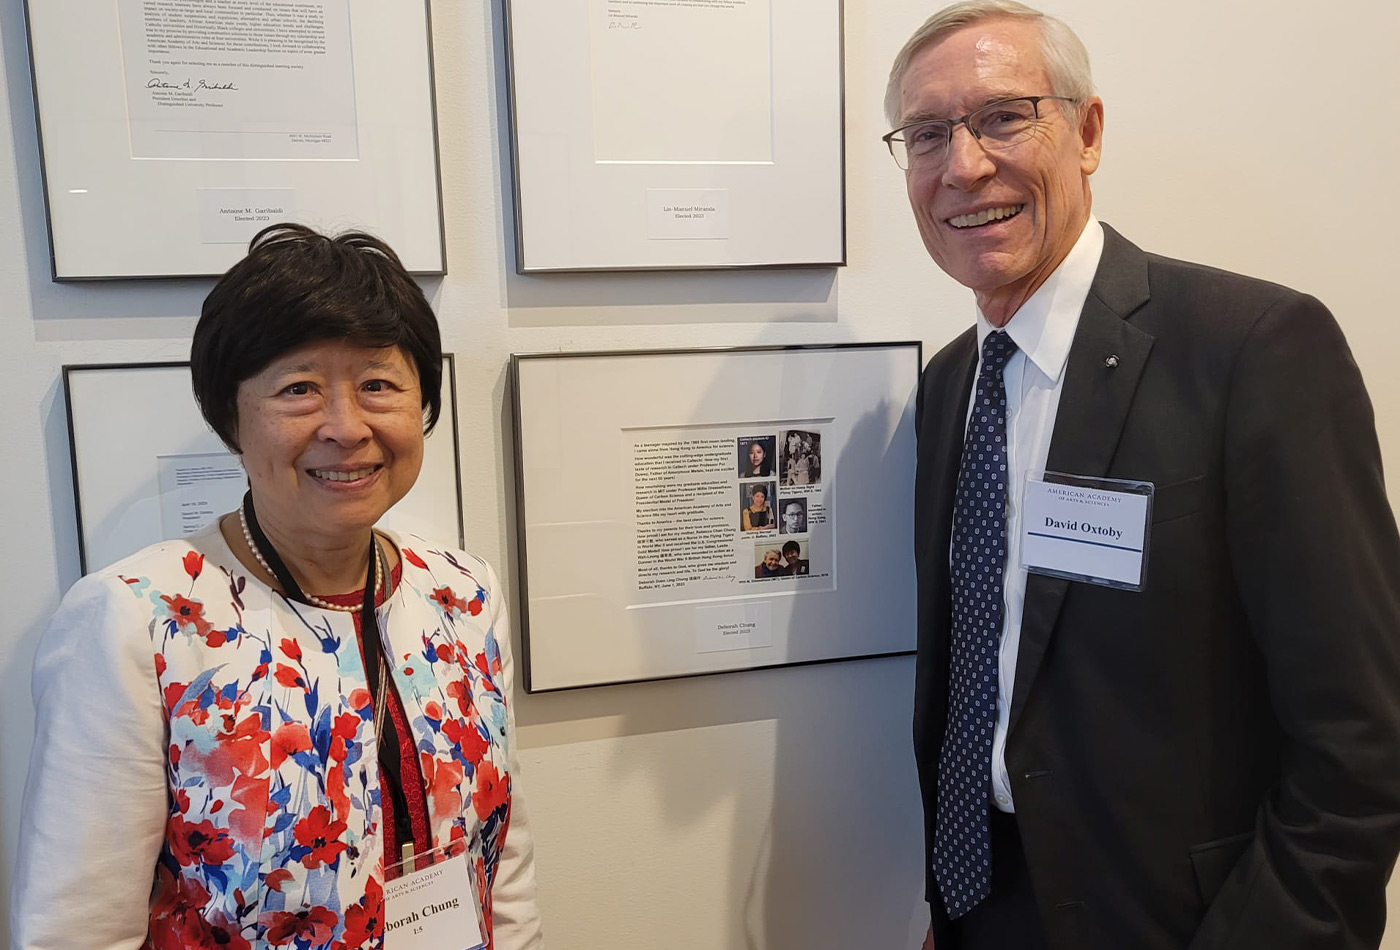 Deborah Chung smiles with David Oxtoby in front of a framed print out of Deborah's American Academy of Arts and Sciences induction letter that is hanging on the wall.